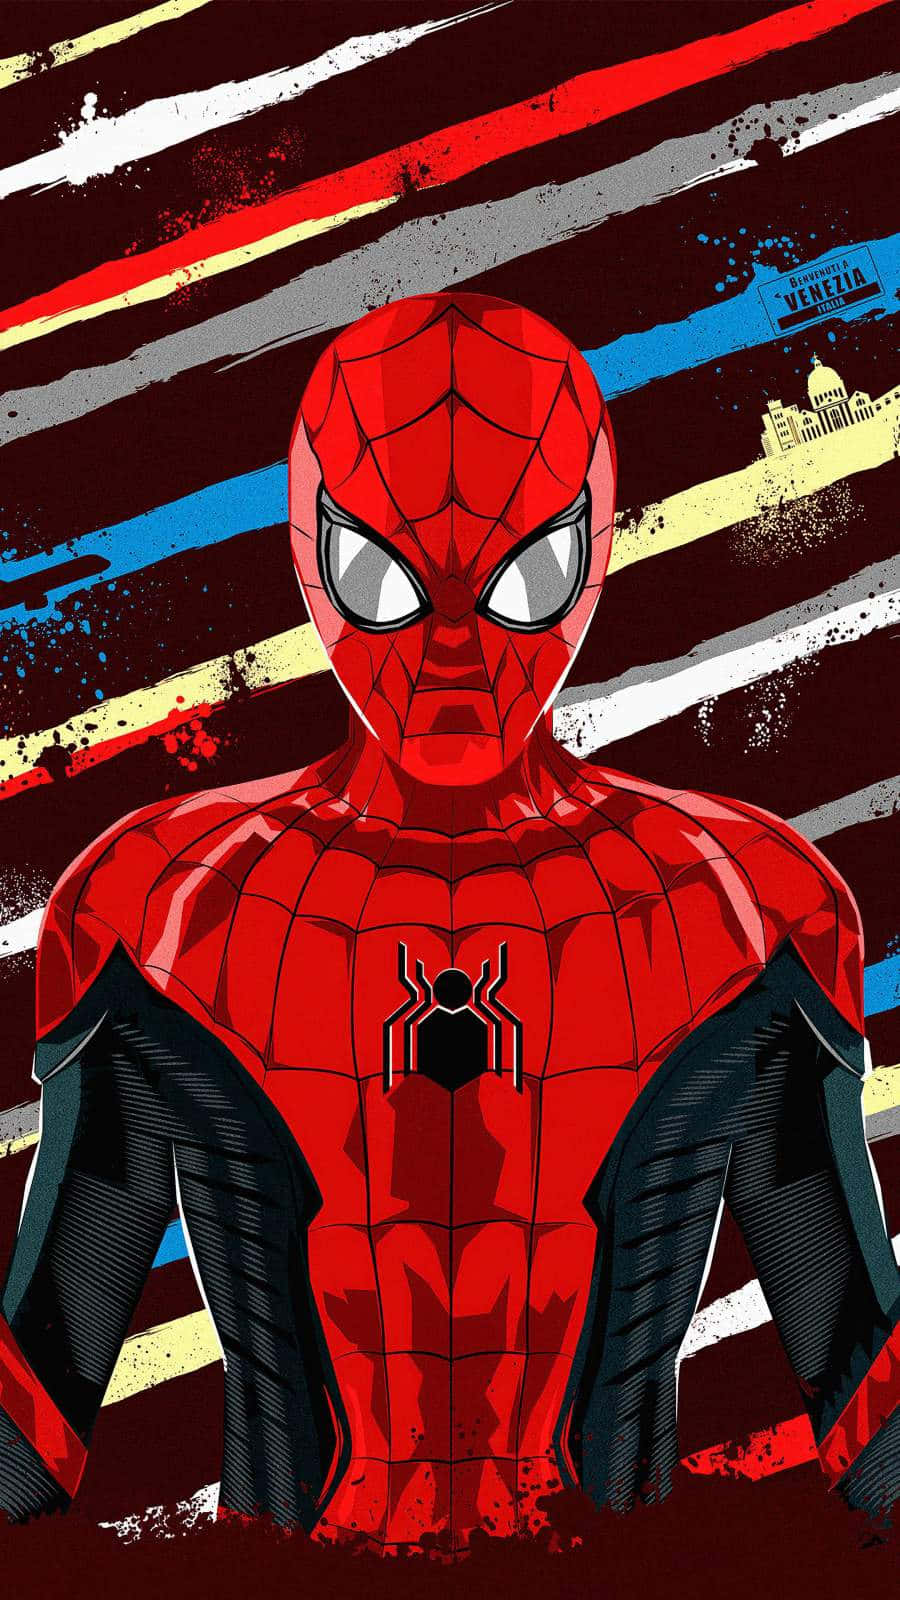 Be the envy of your friends with this Marvel Art themed iPhone! Wallpaper